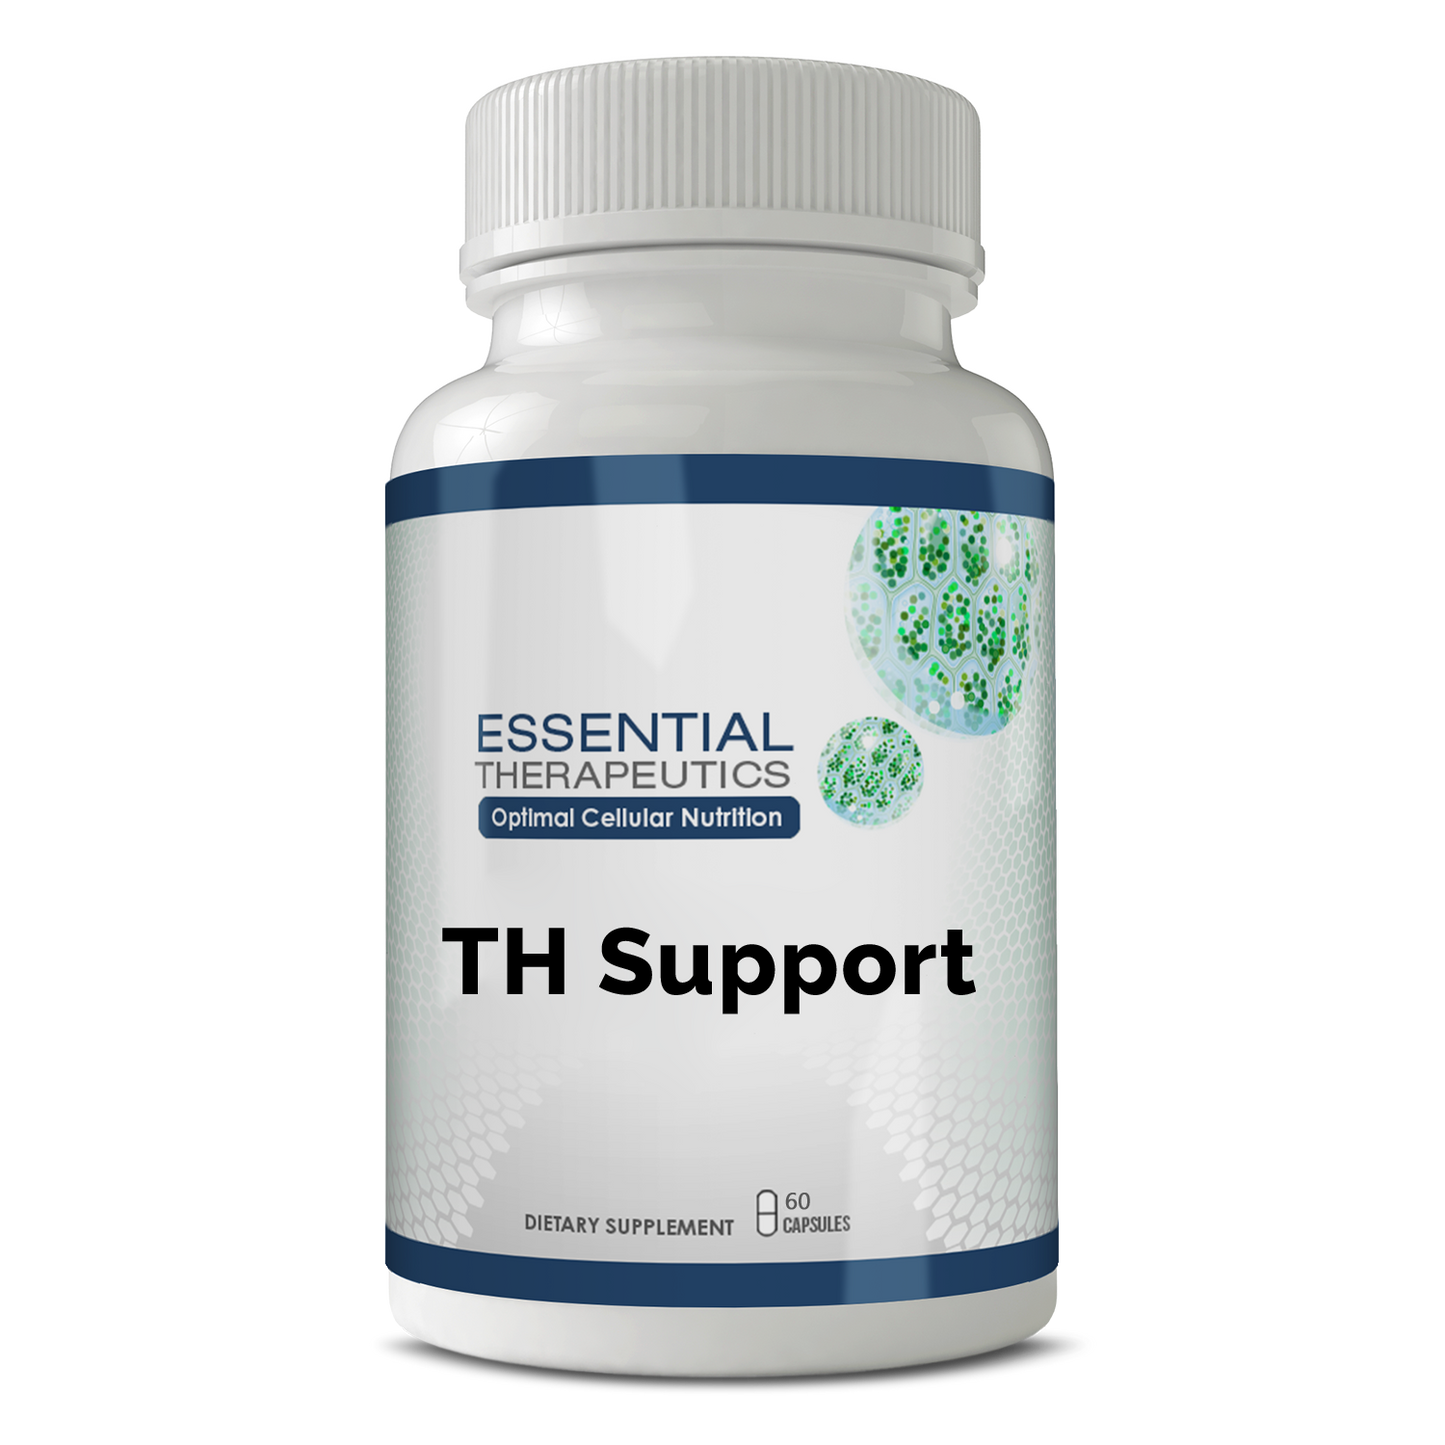 TH Support